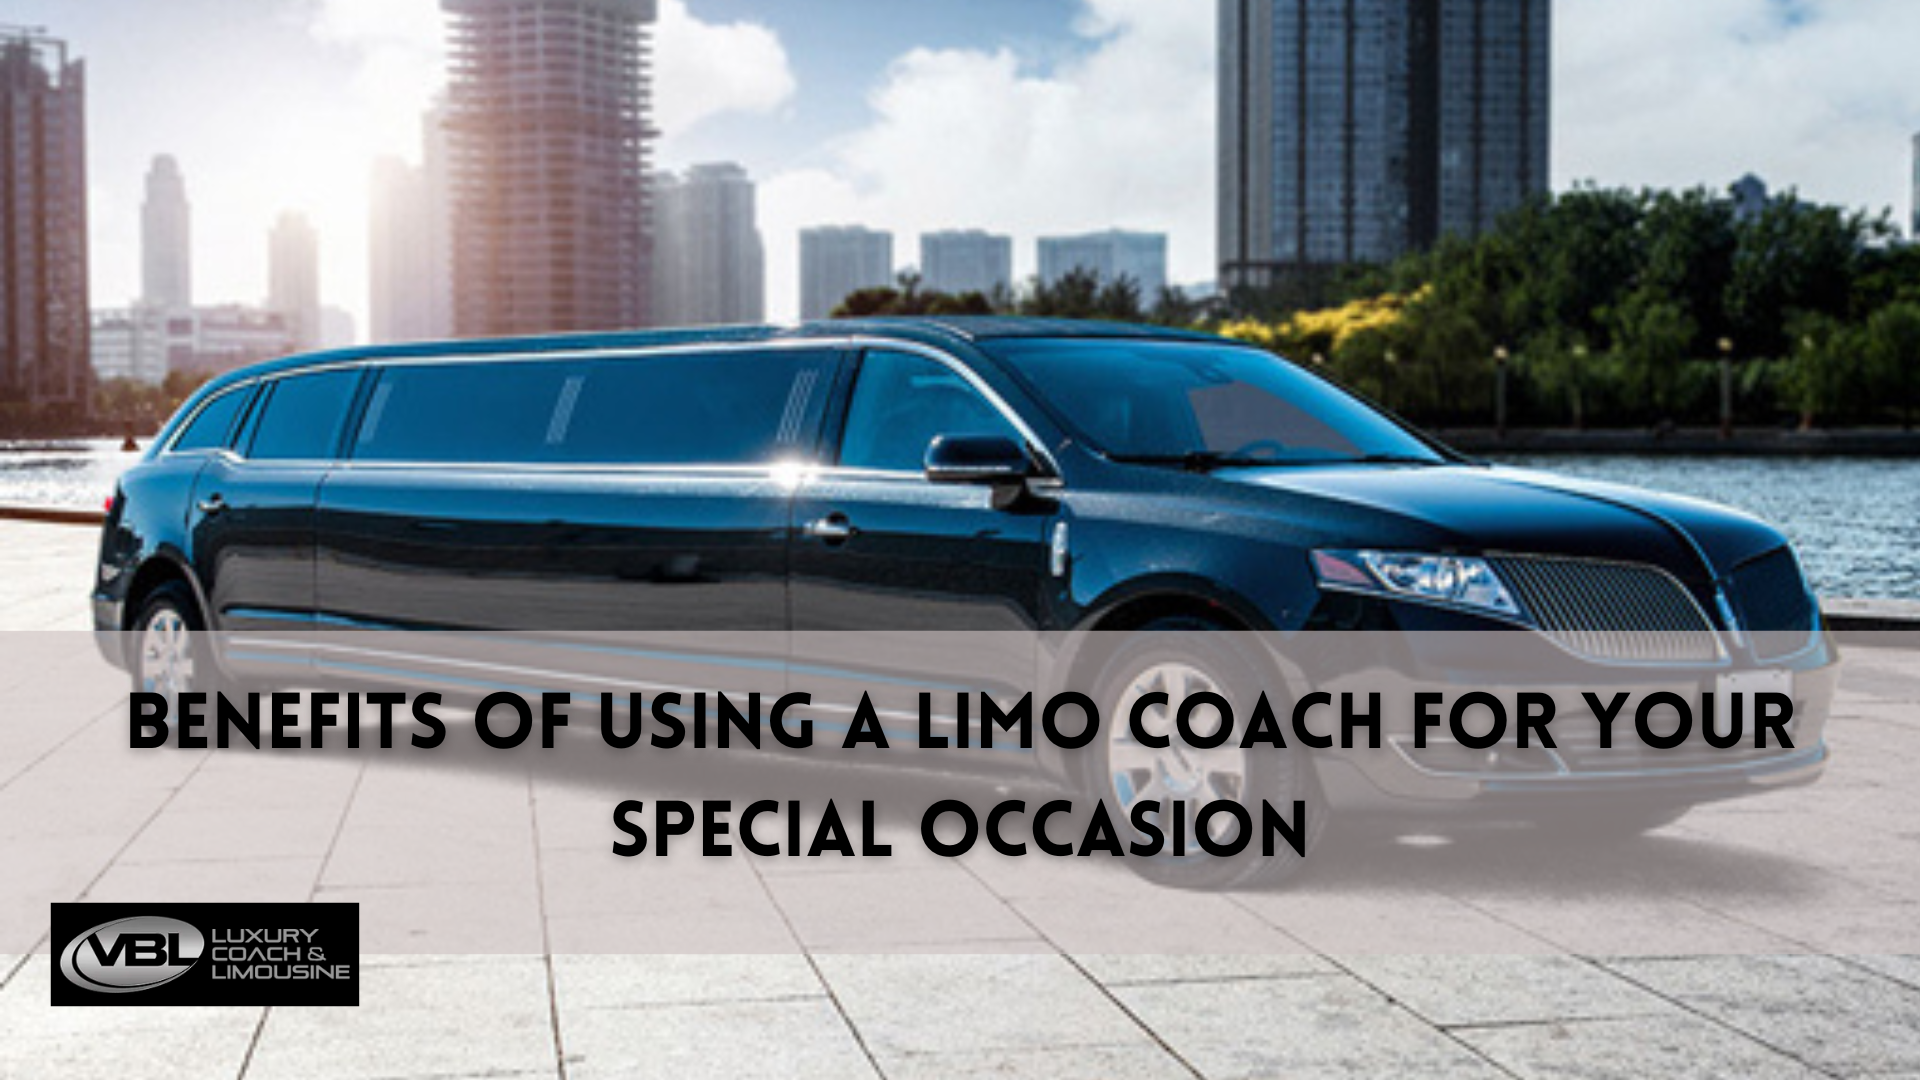 Limo for special occasions